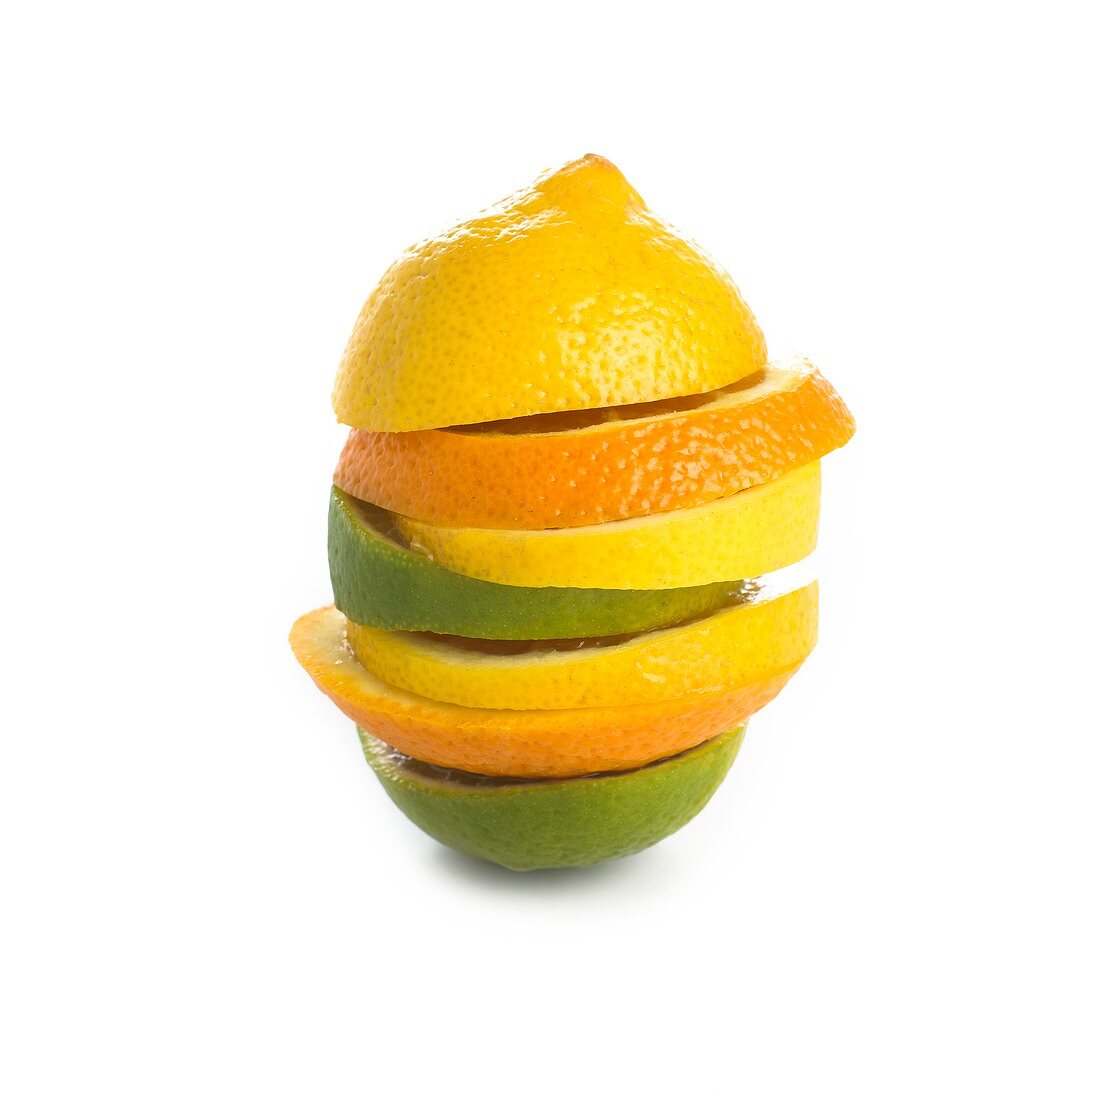 Citrus fruit slices in a stack